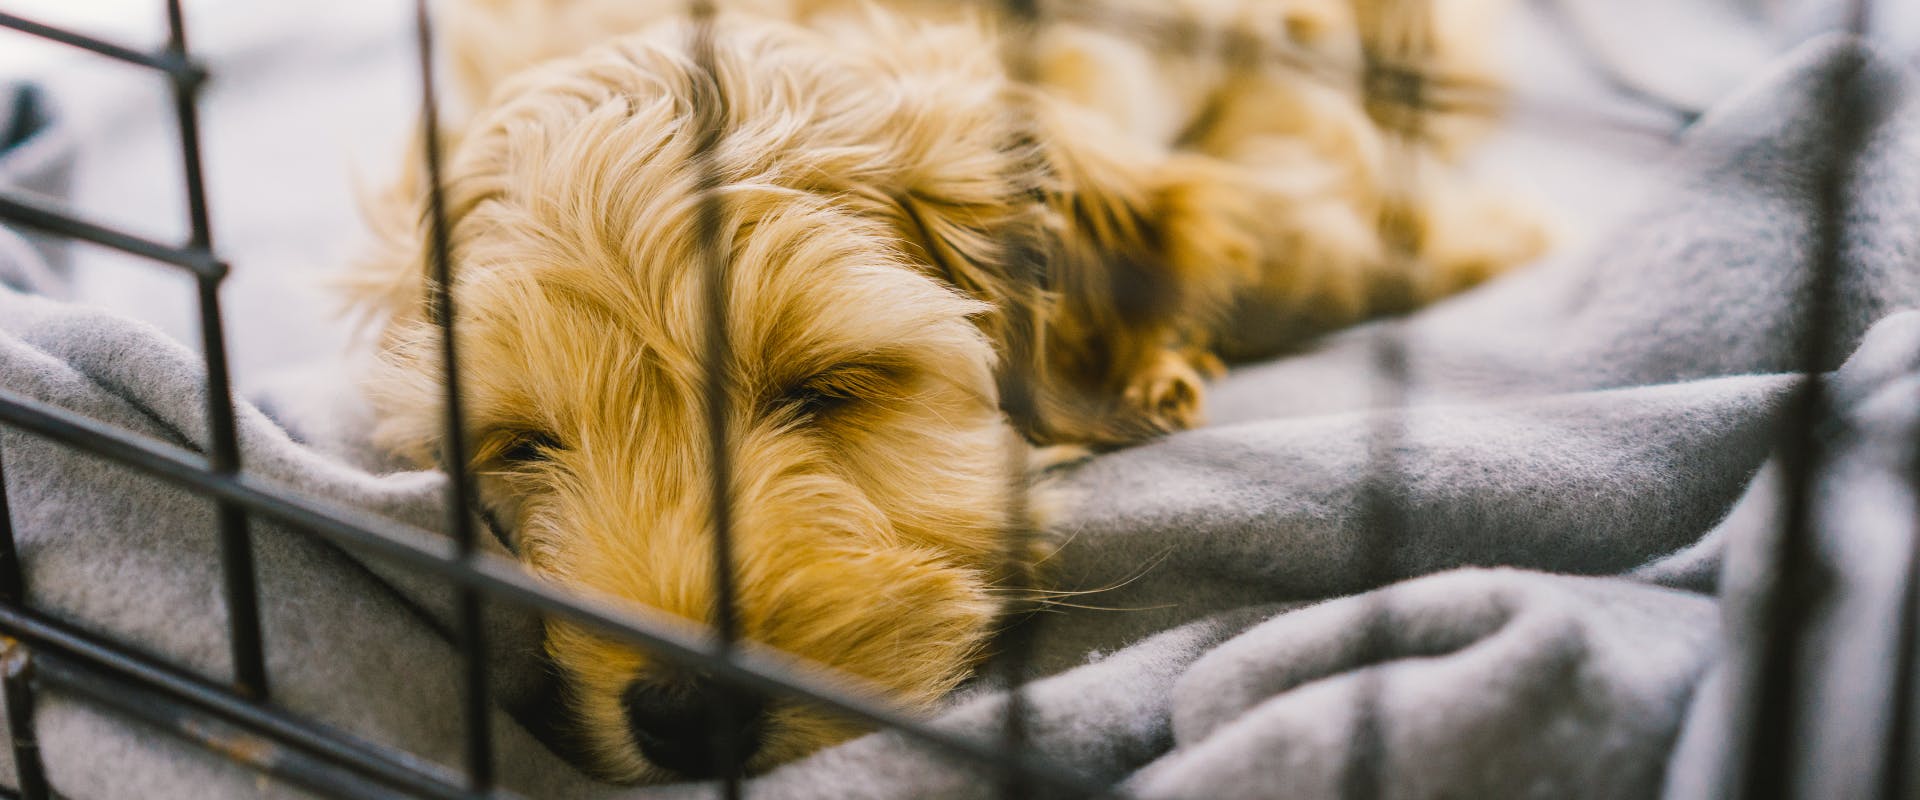 A puppy sleeps in a dog crate.